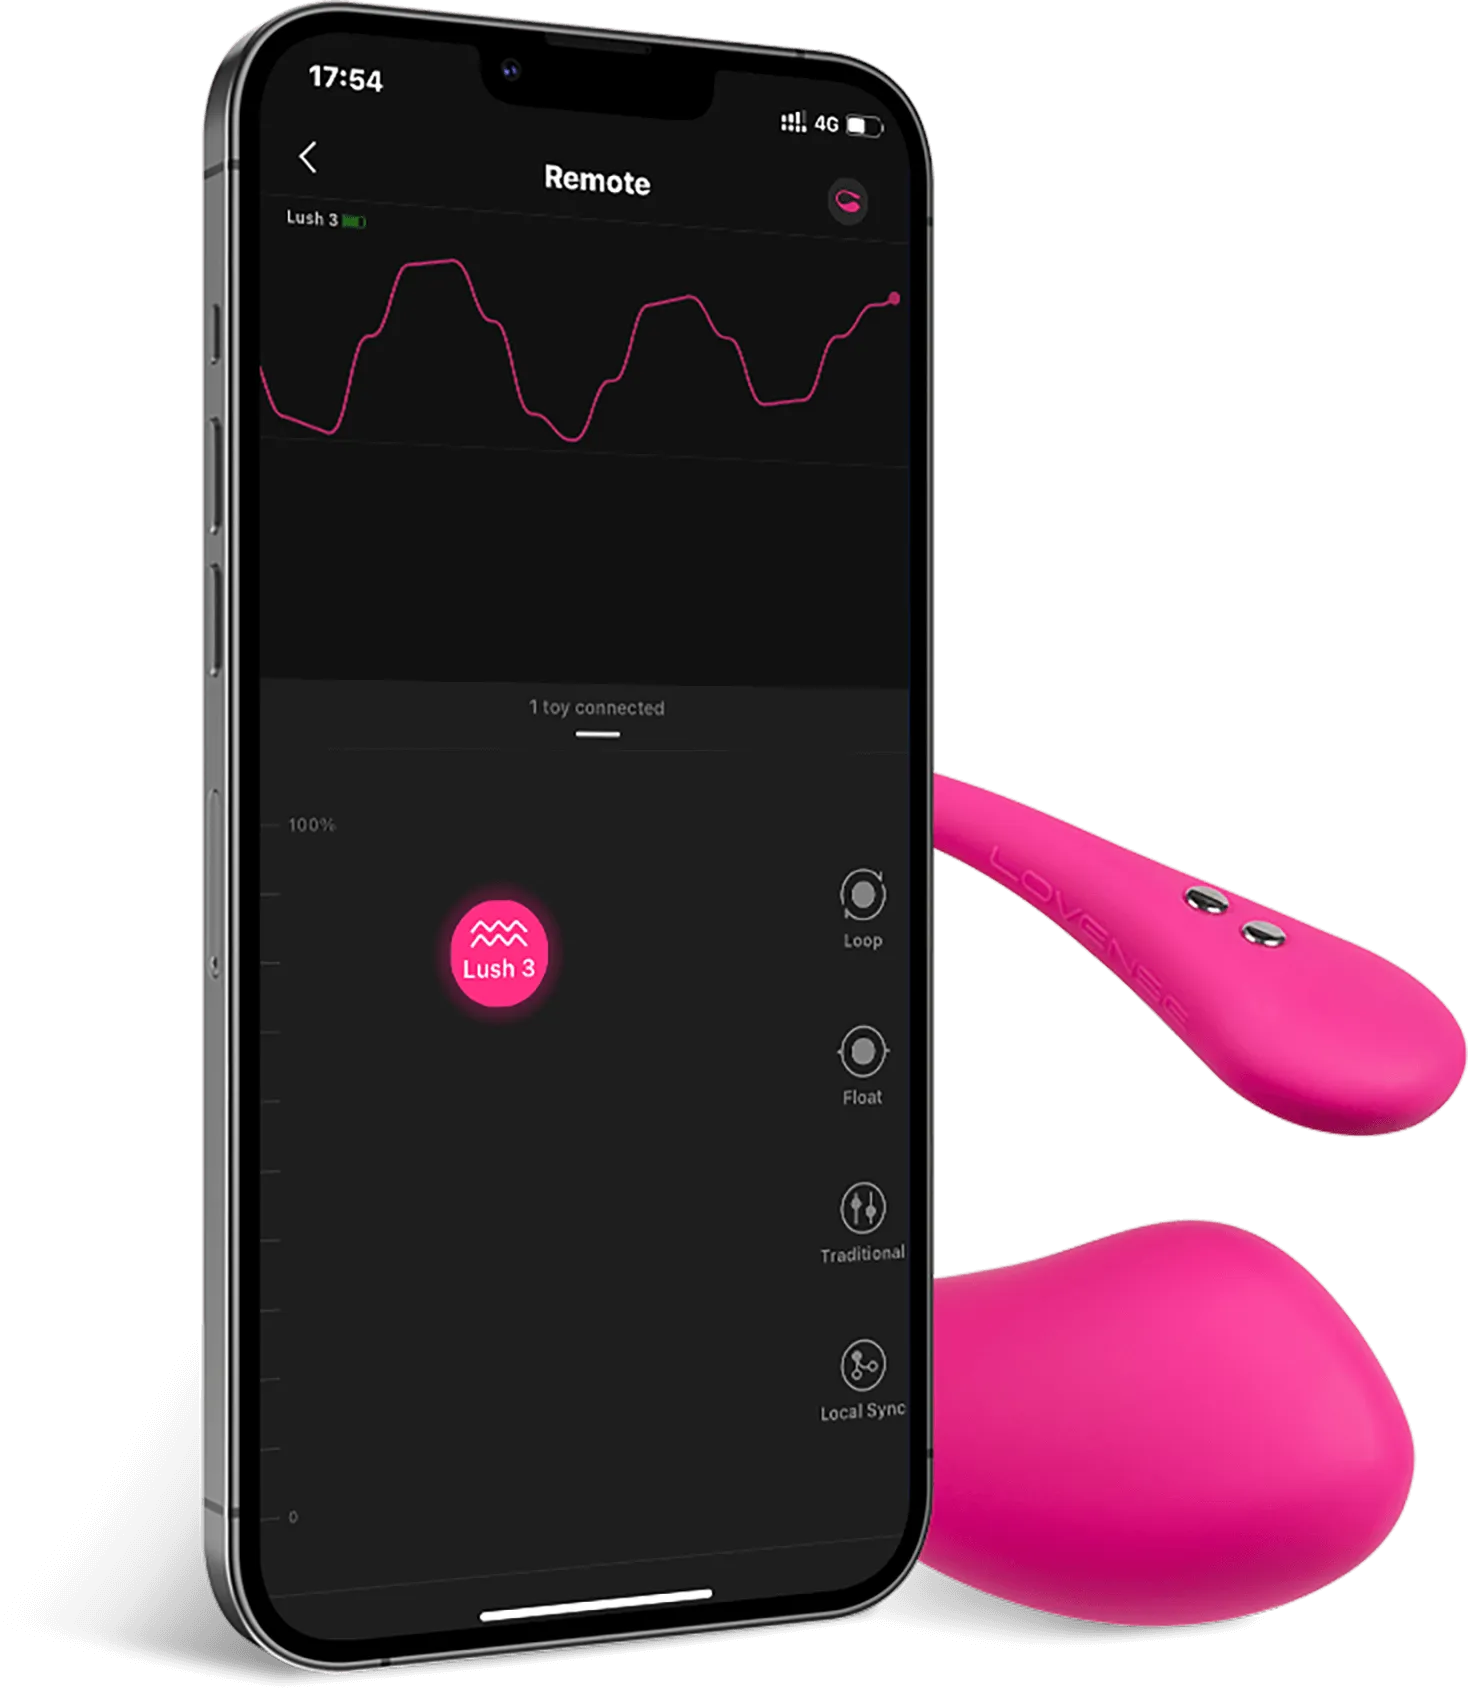 Lush 3 and Lovense Remote app features